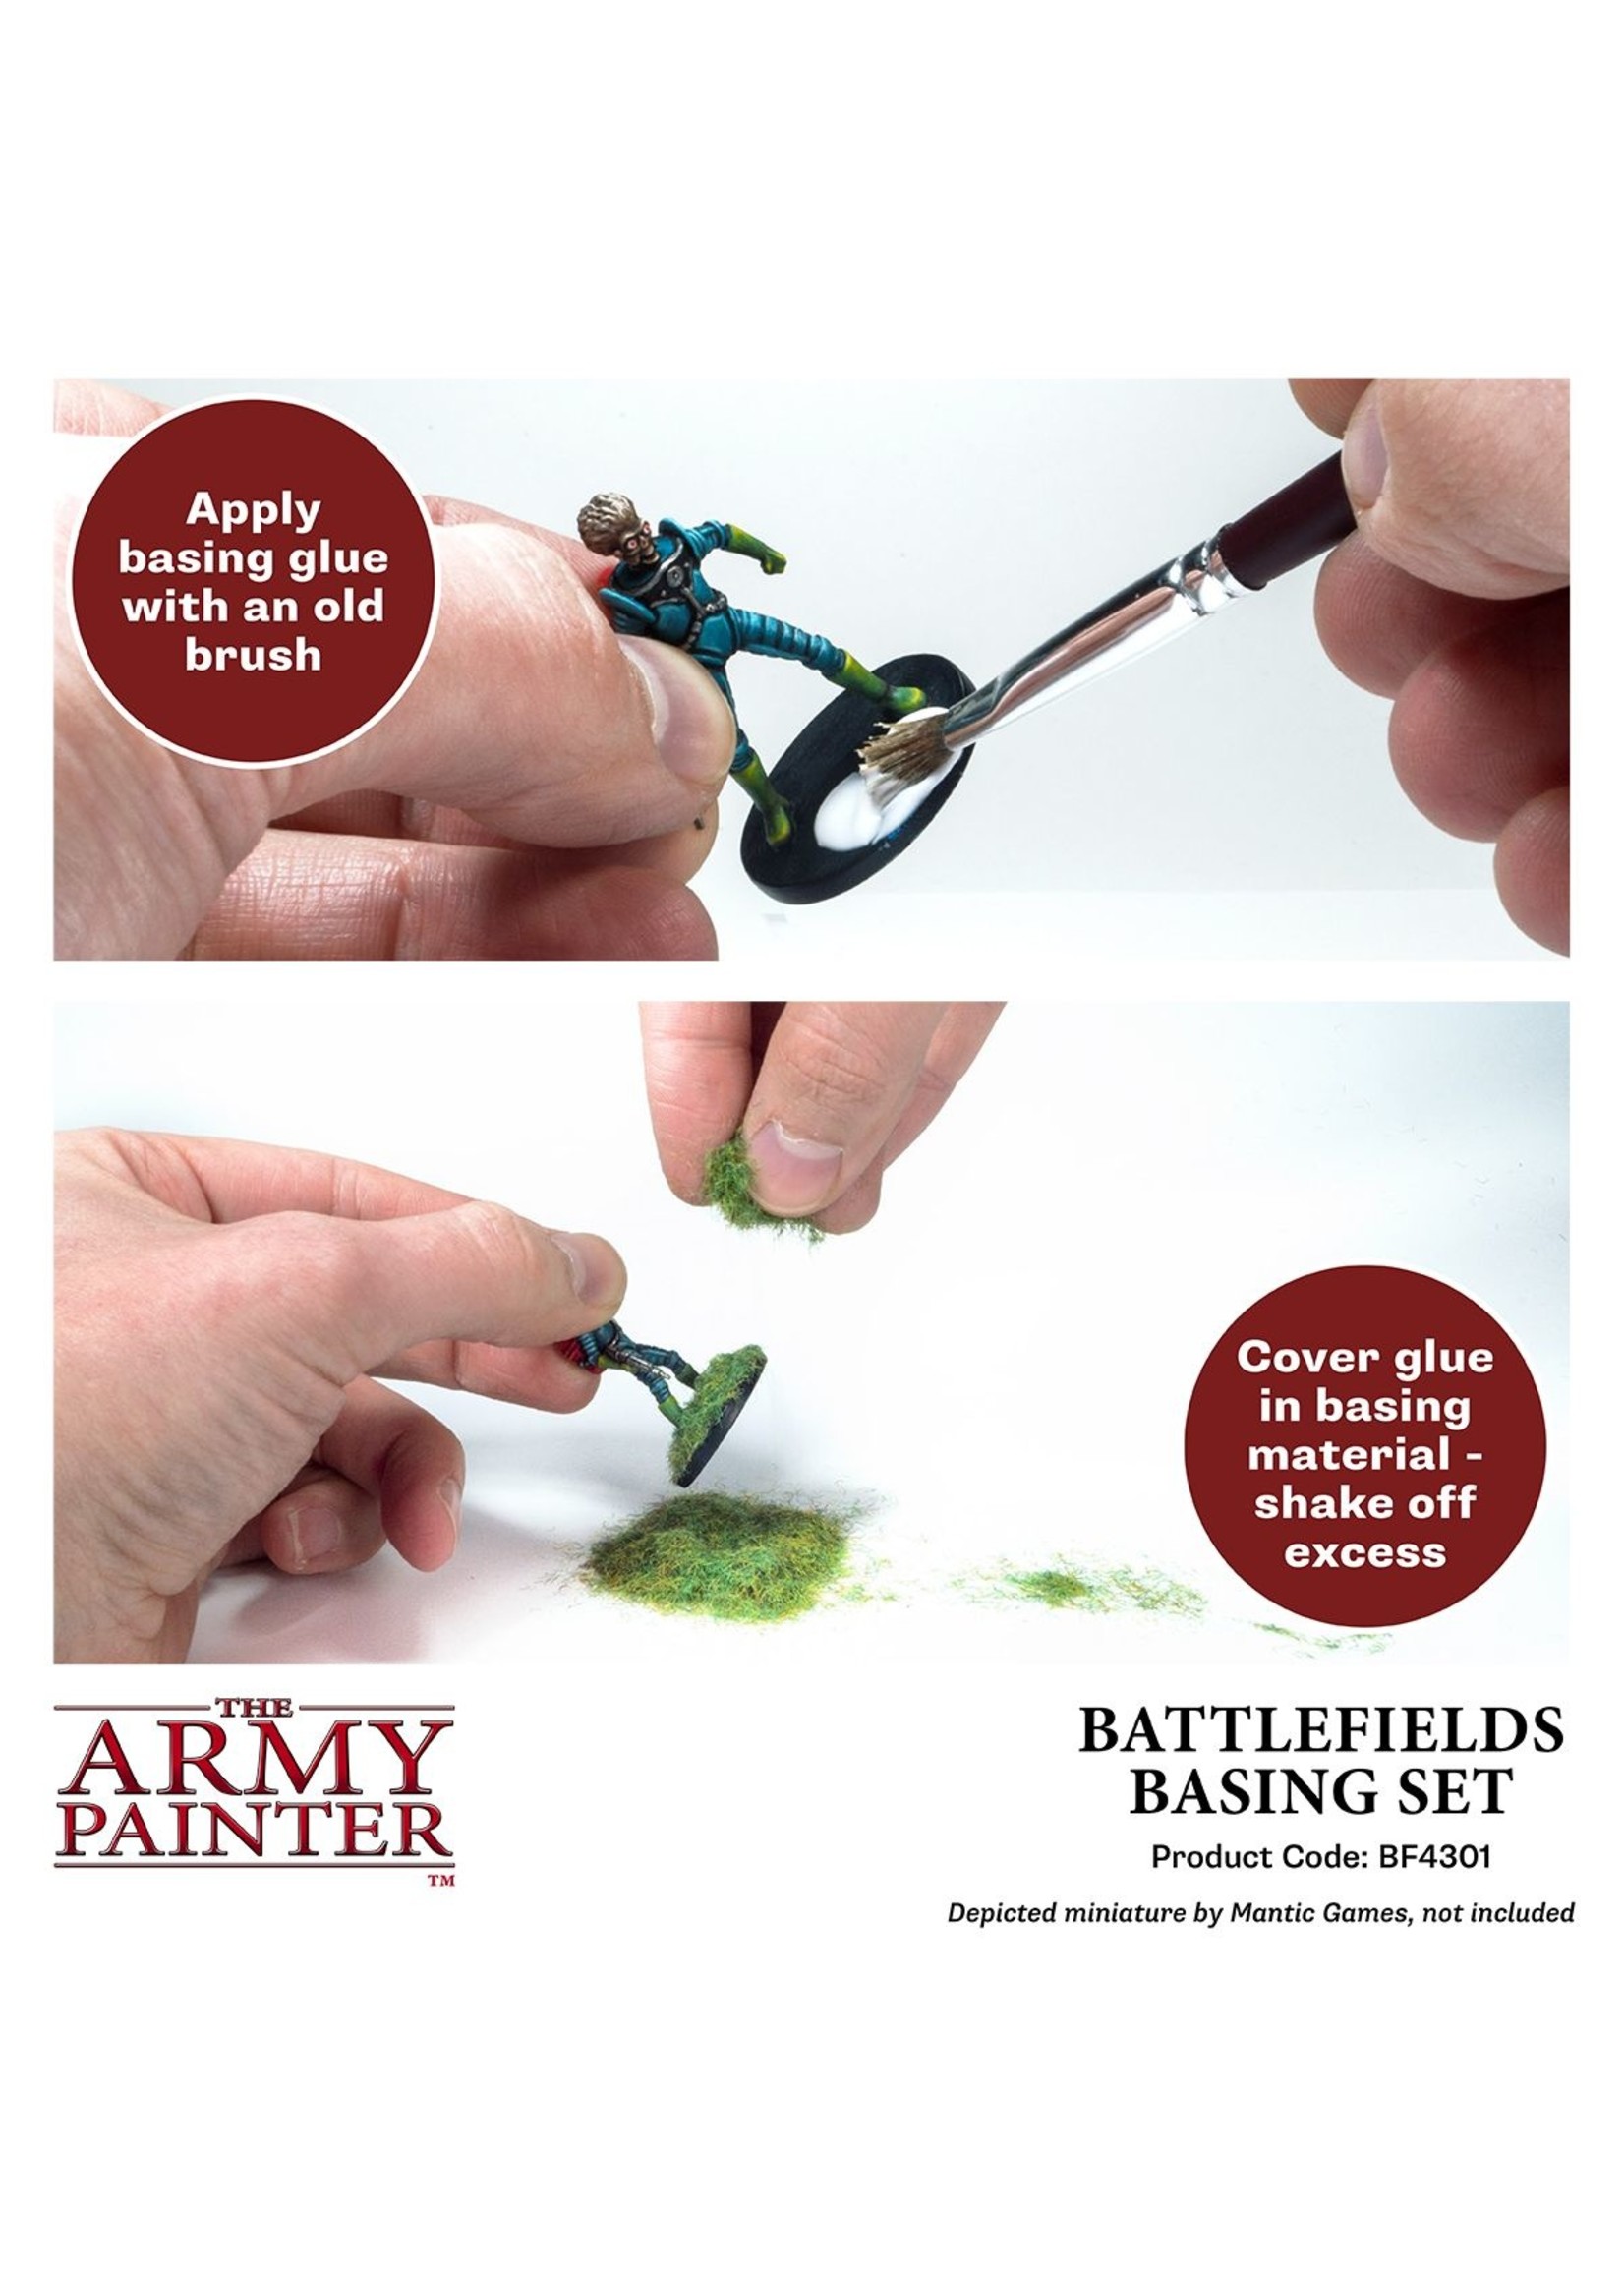 Army Painter Hobby Tools: Hobby Tool Kit – Common Ground Games